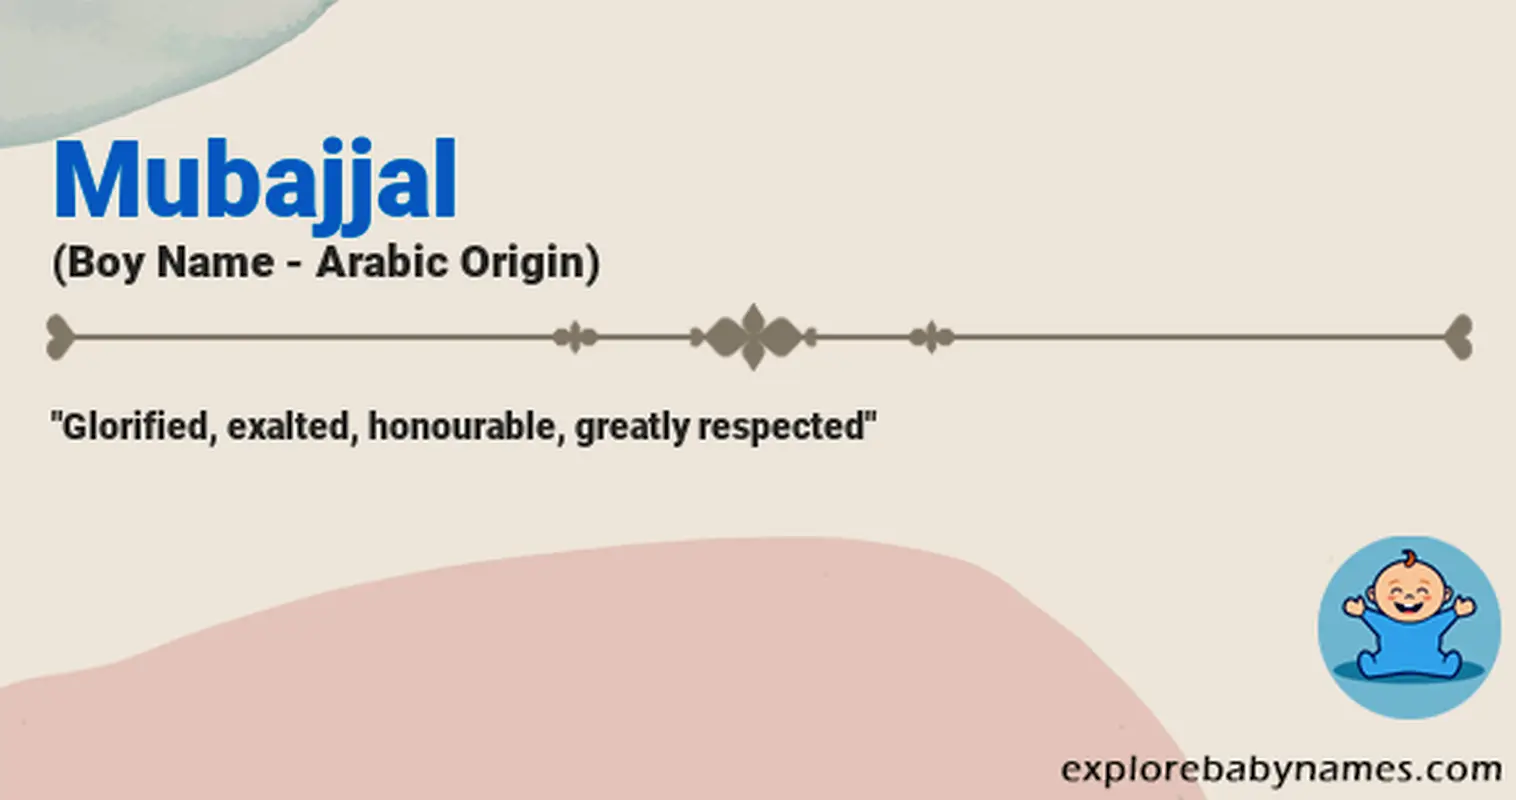 Meaning of Mubajjal